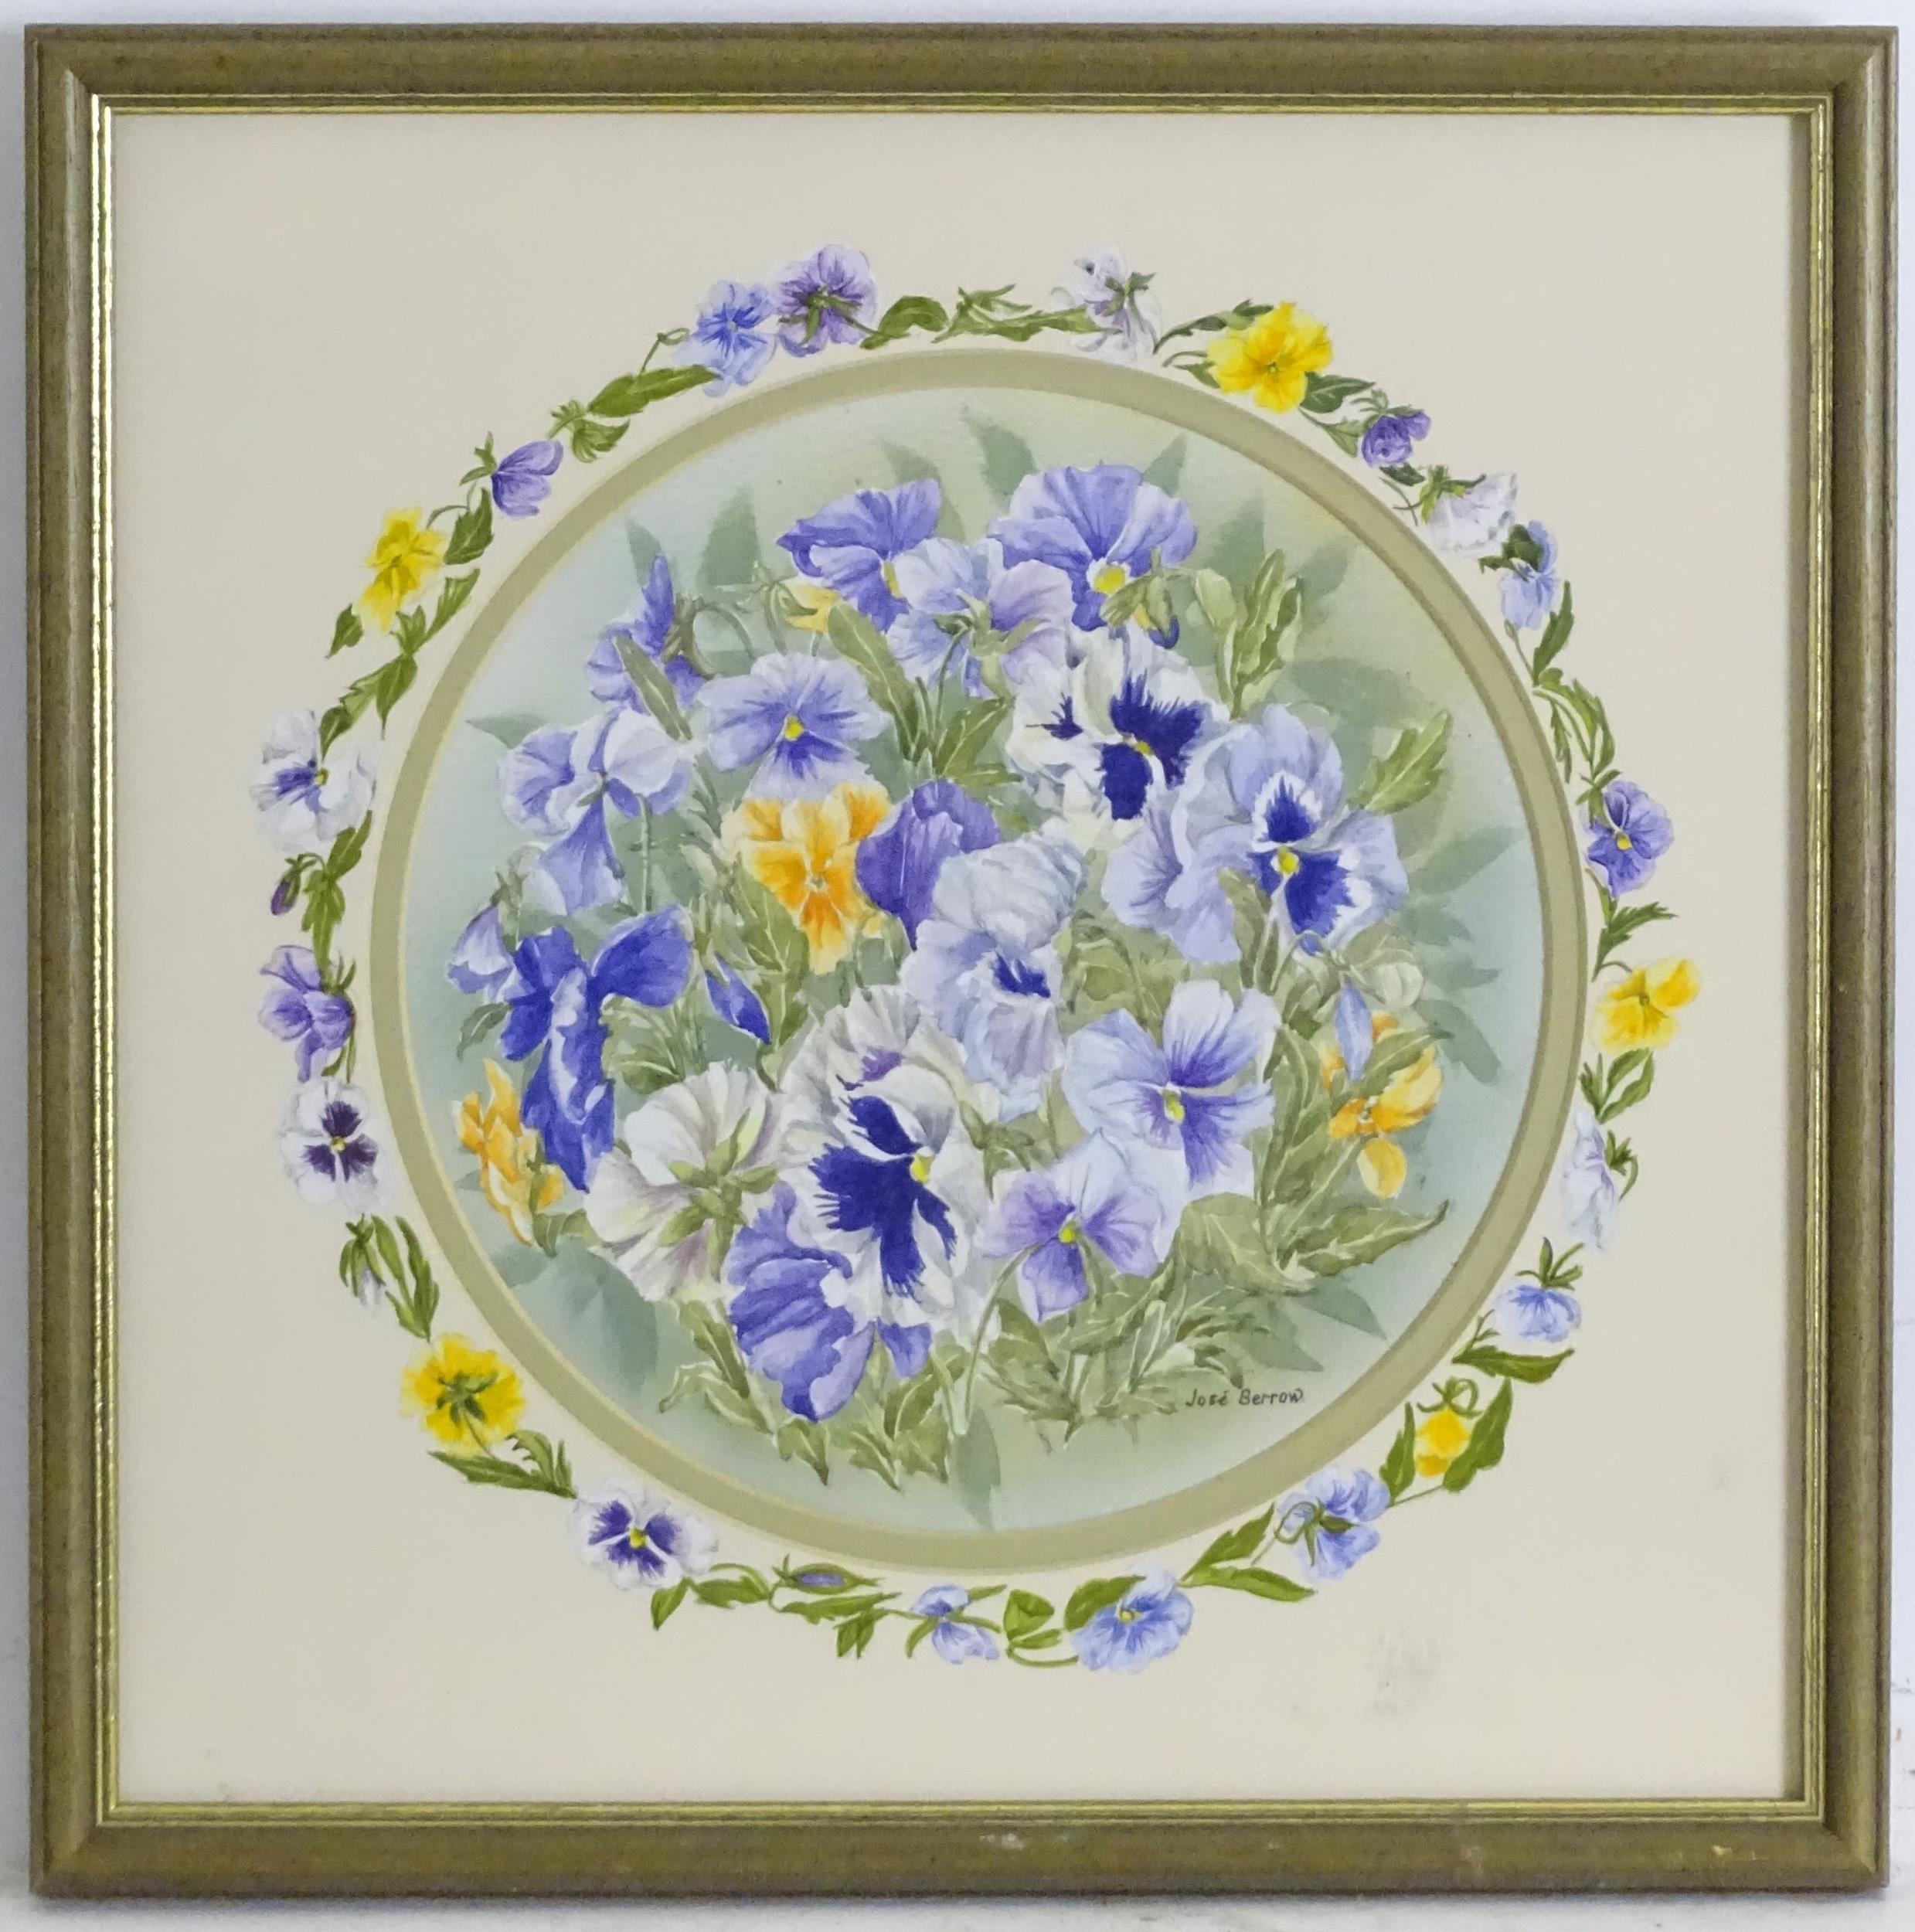 Jose Berrow, 20th century, Watercolour, A pansy garland, with floral border. Signed lower right.